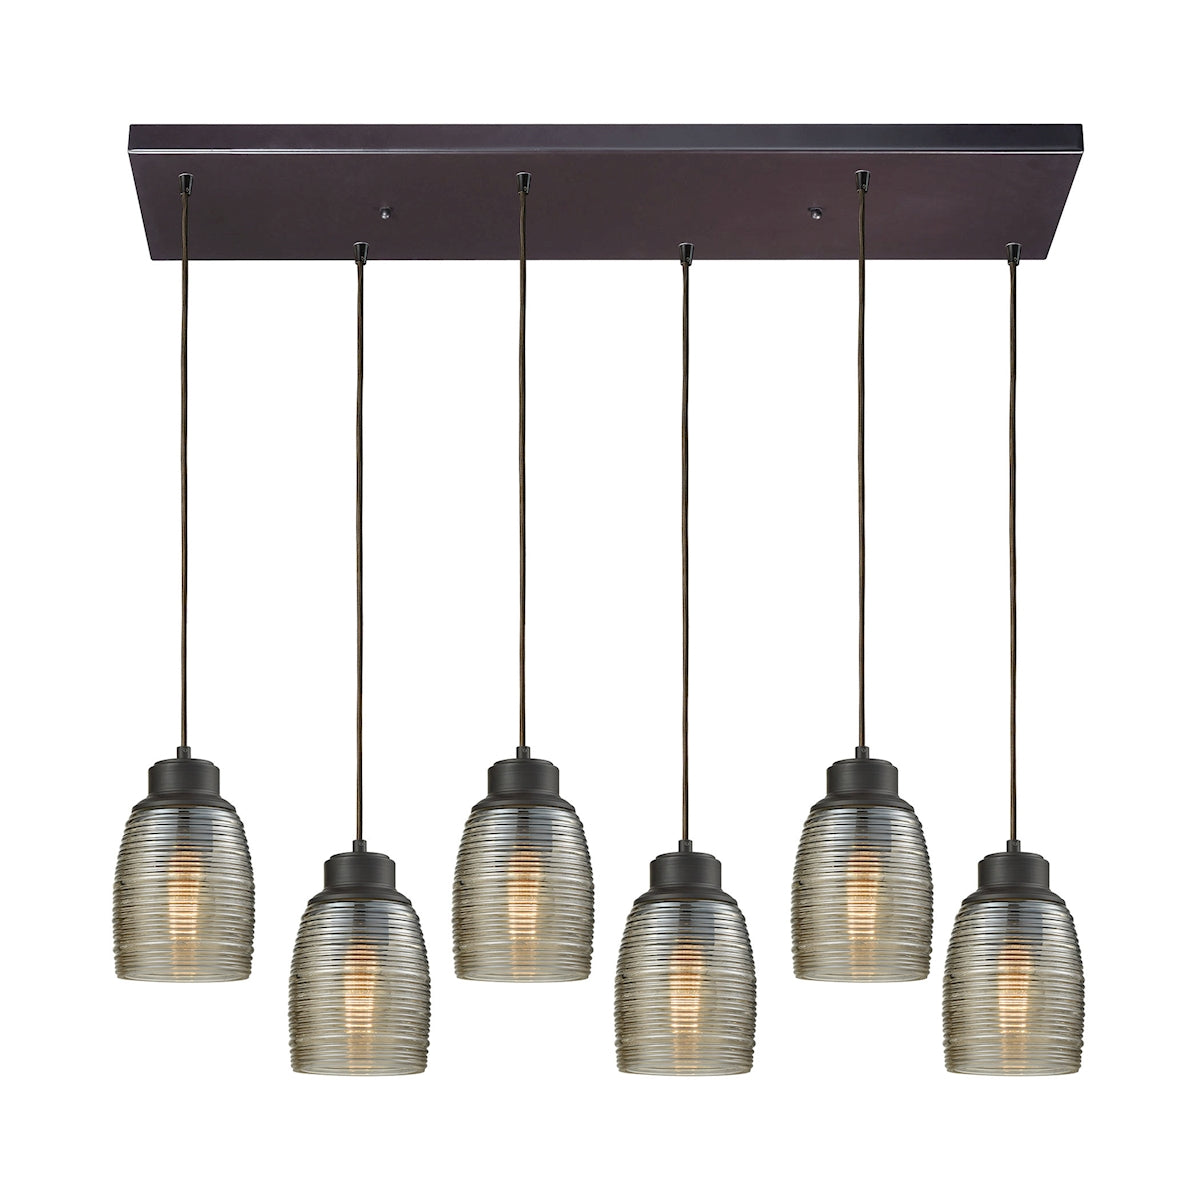 ELK Lighting 46216/6RC Muncie 6-Light Rectangular Pendant Fixture in Oil Rubbed Bronze with Champagne-plated Spun Glass